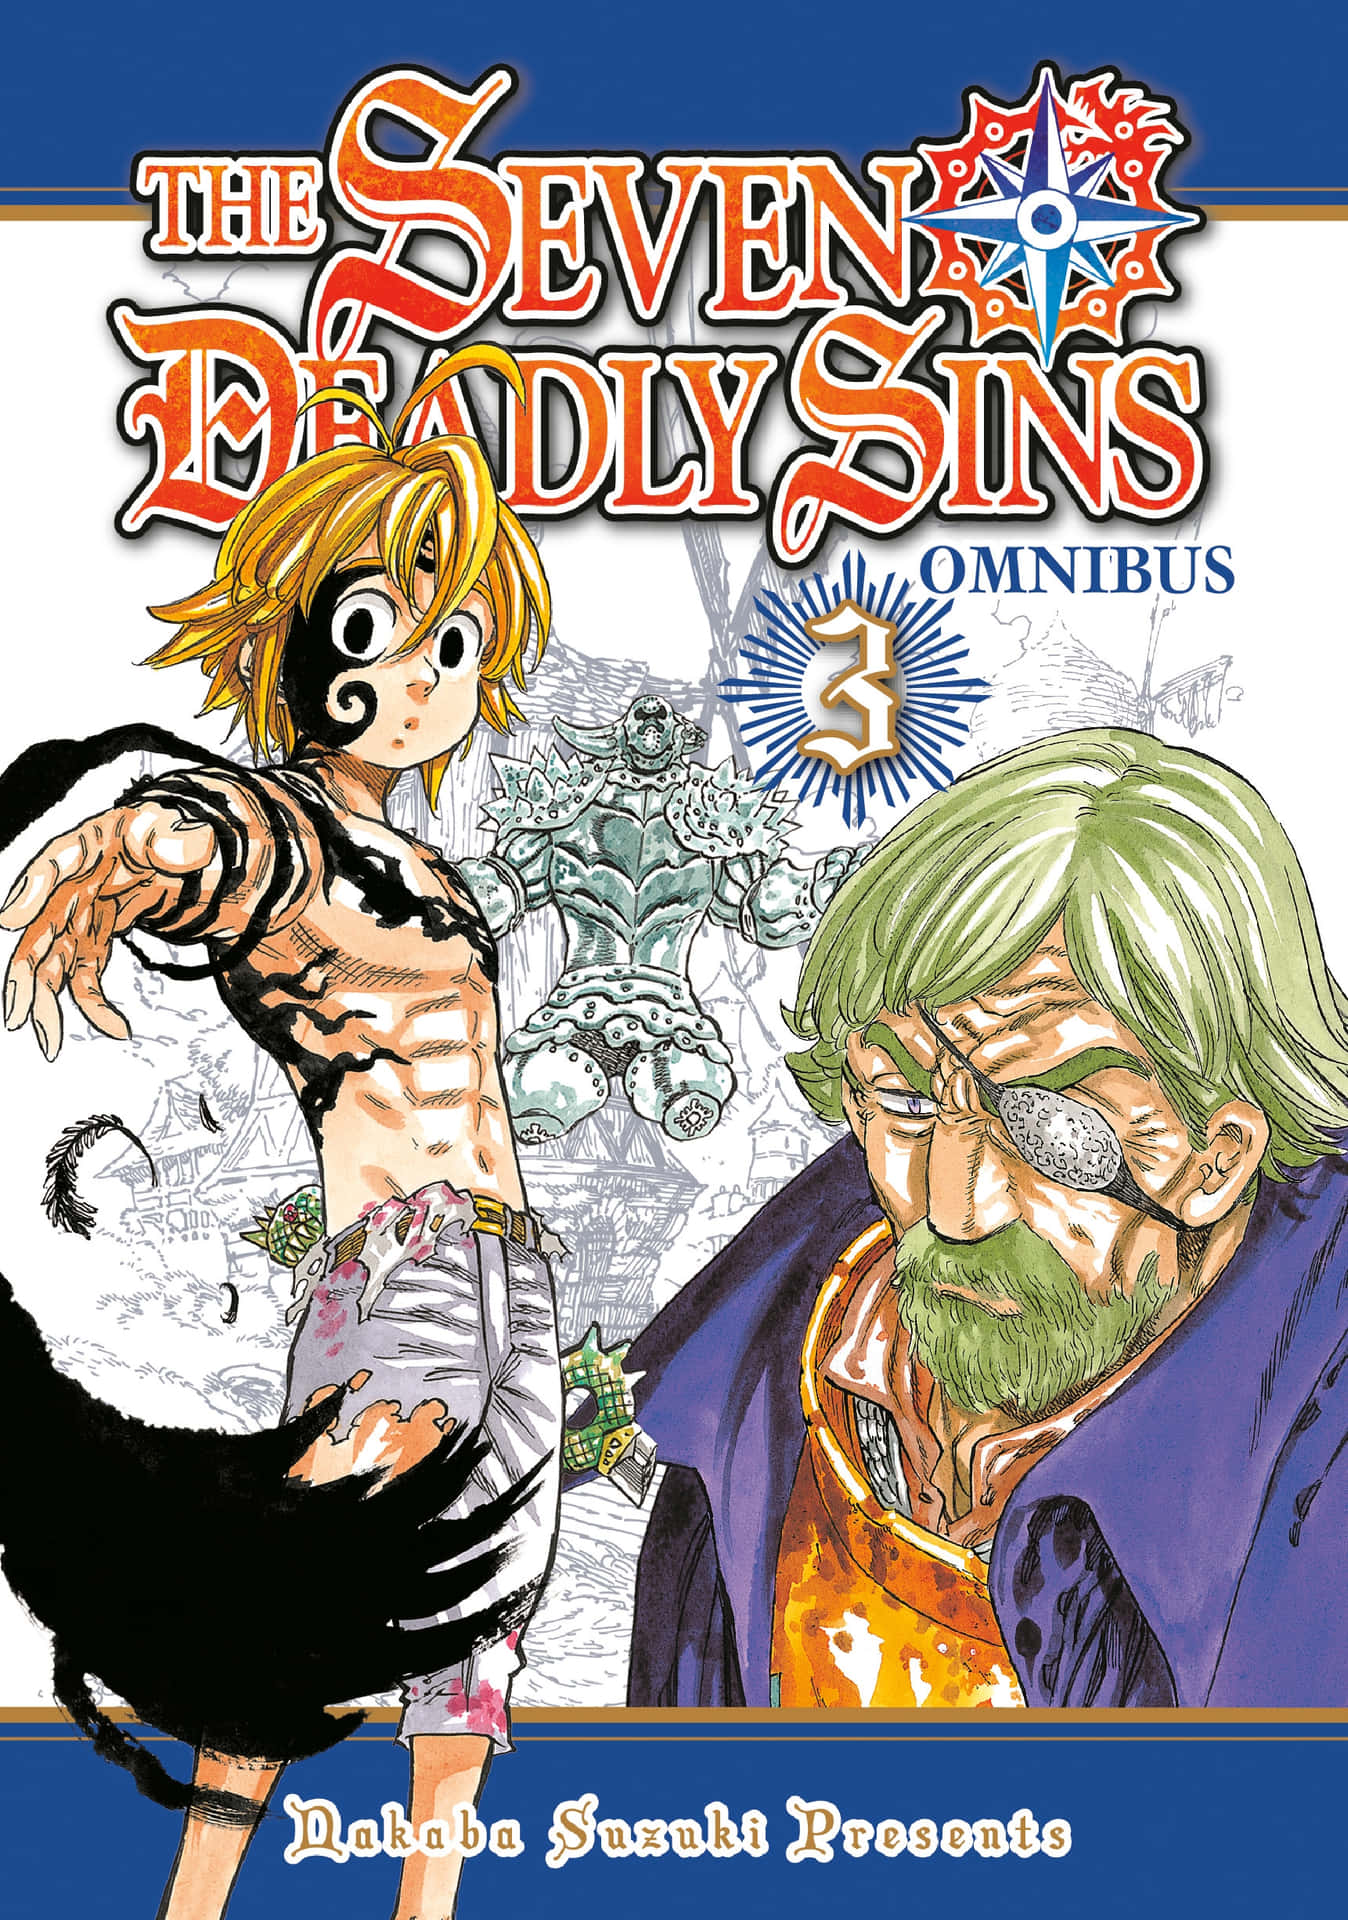 The Seven Deadly Sins, Illustrated